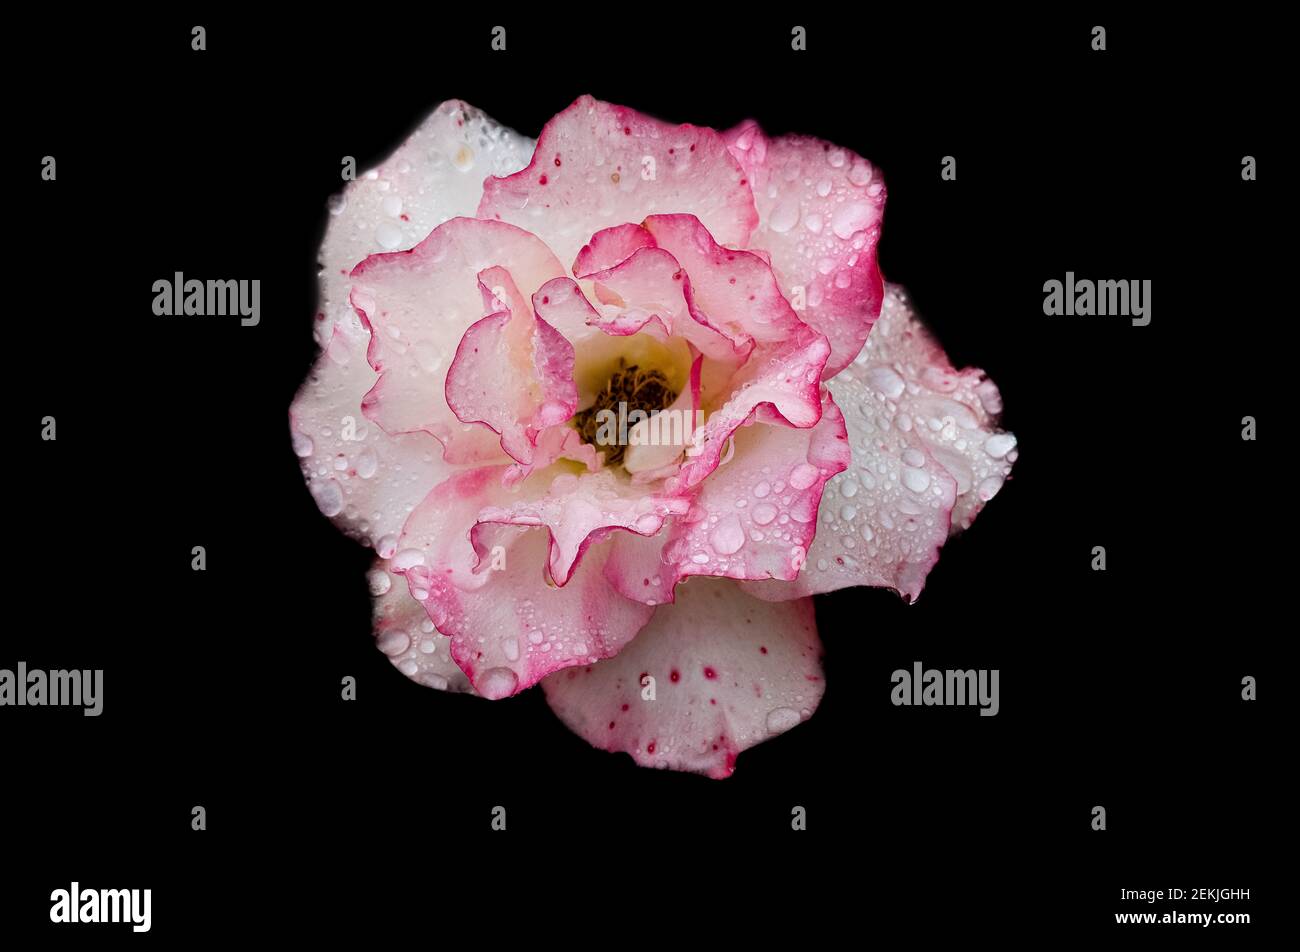 Dew covered pink and white rose head in black background Stock Photo